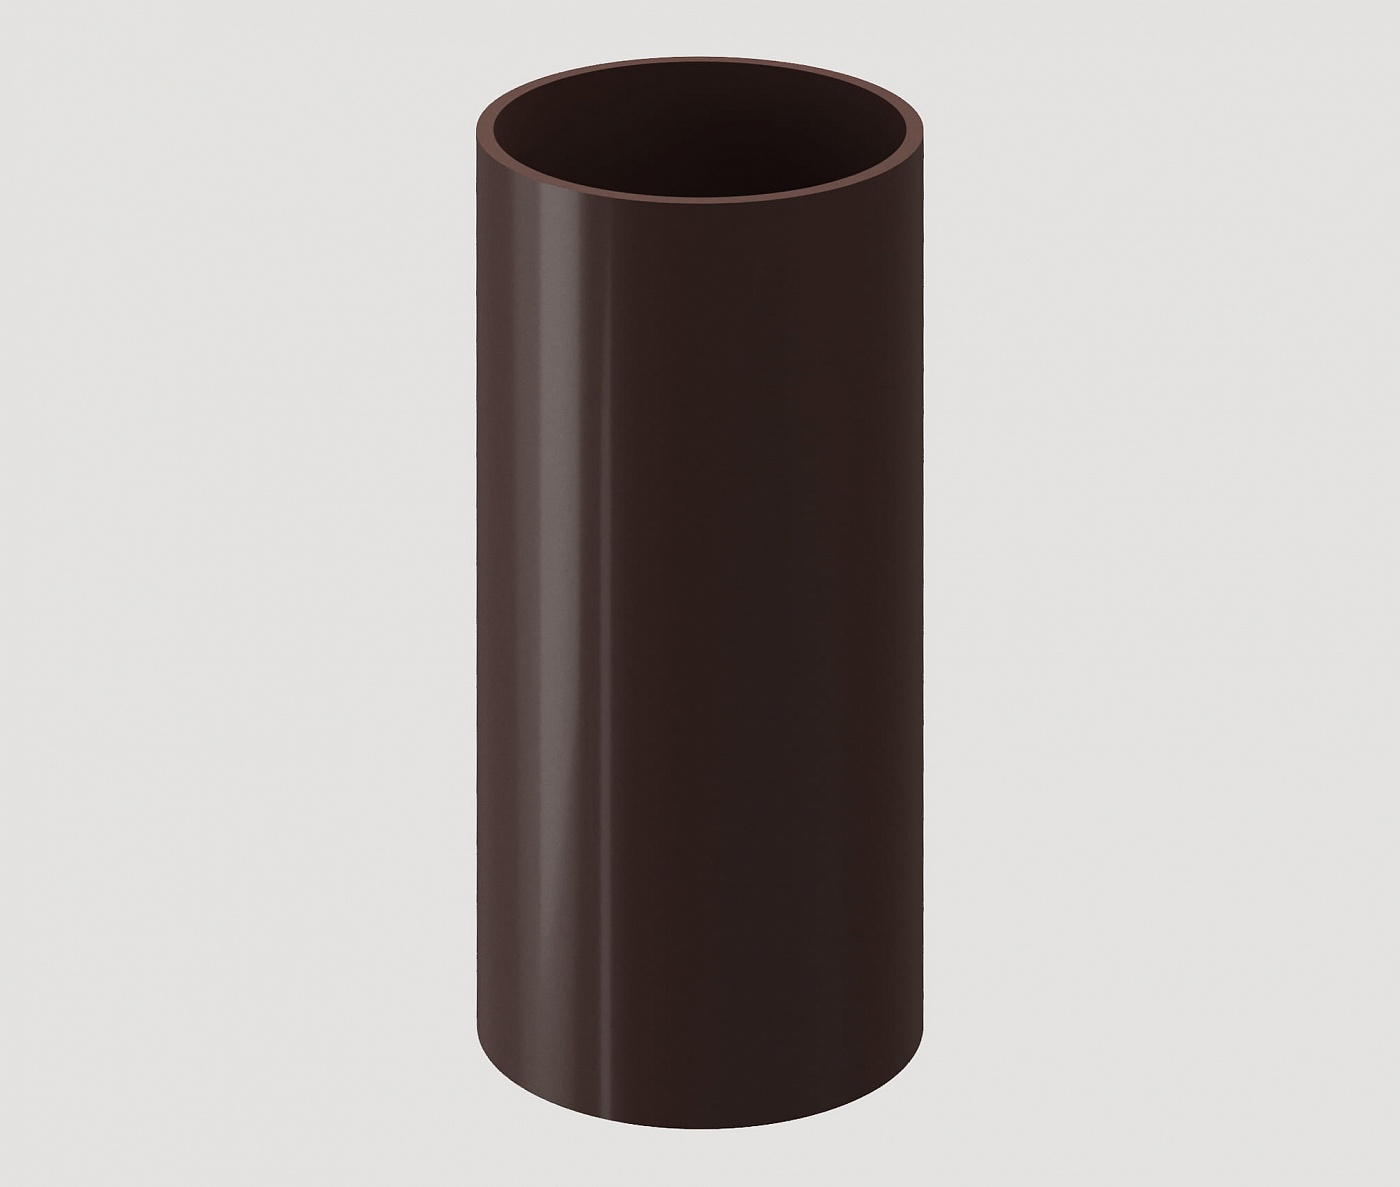 Водостоки - STANDARD SERIES Dark brown RAL 8017 - Elements of the drainage system - Pipe 3m